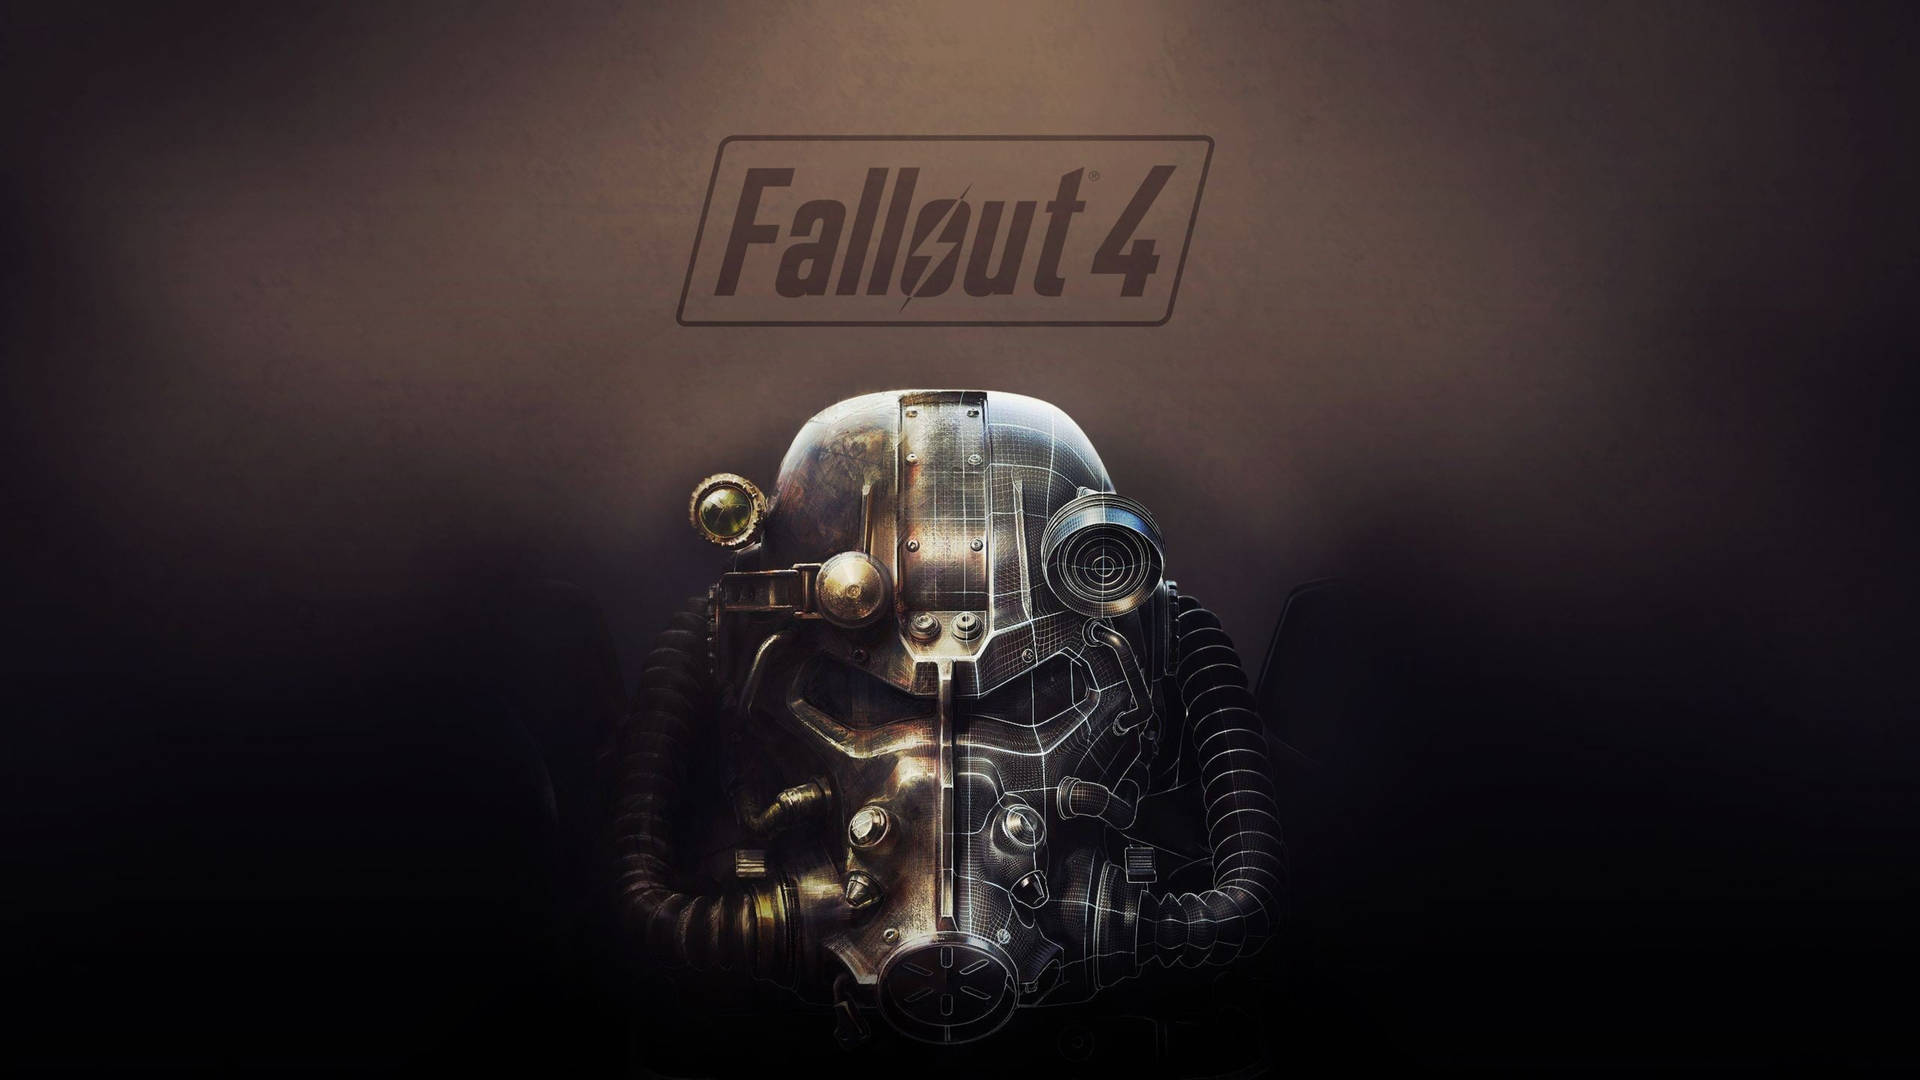 90 Fallout 4 HD Wallpapers  Backgrounds  Wallpaper Abyss  Fallout 4  concept art Fallout concept art Fallout 4 wallpapers